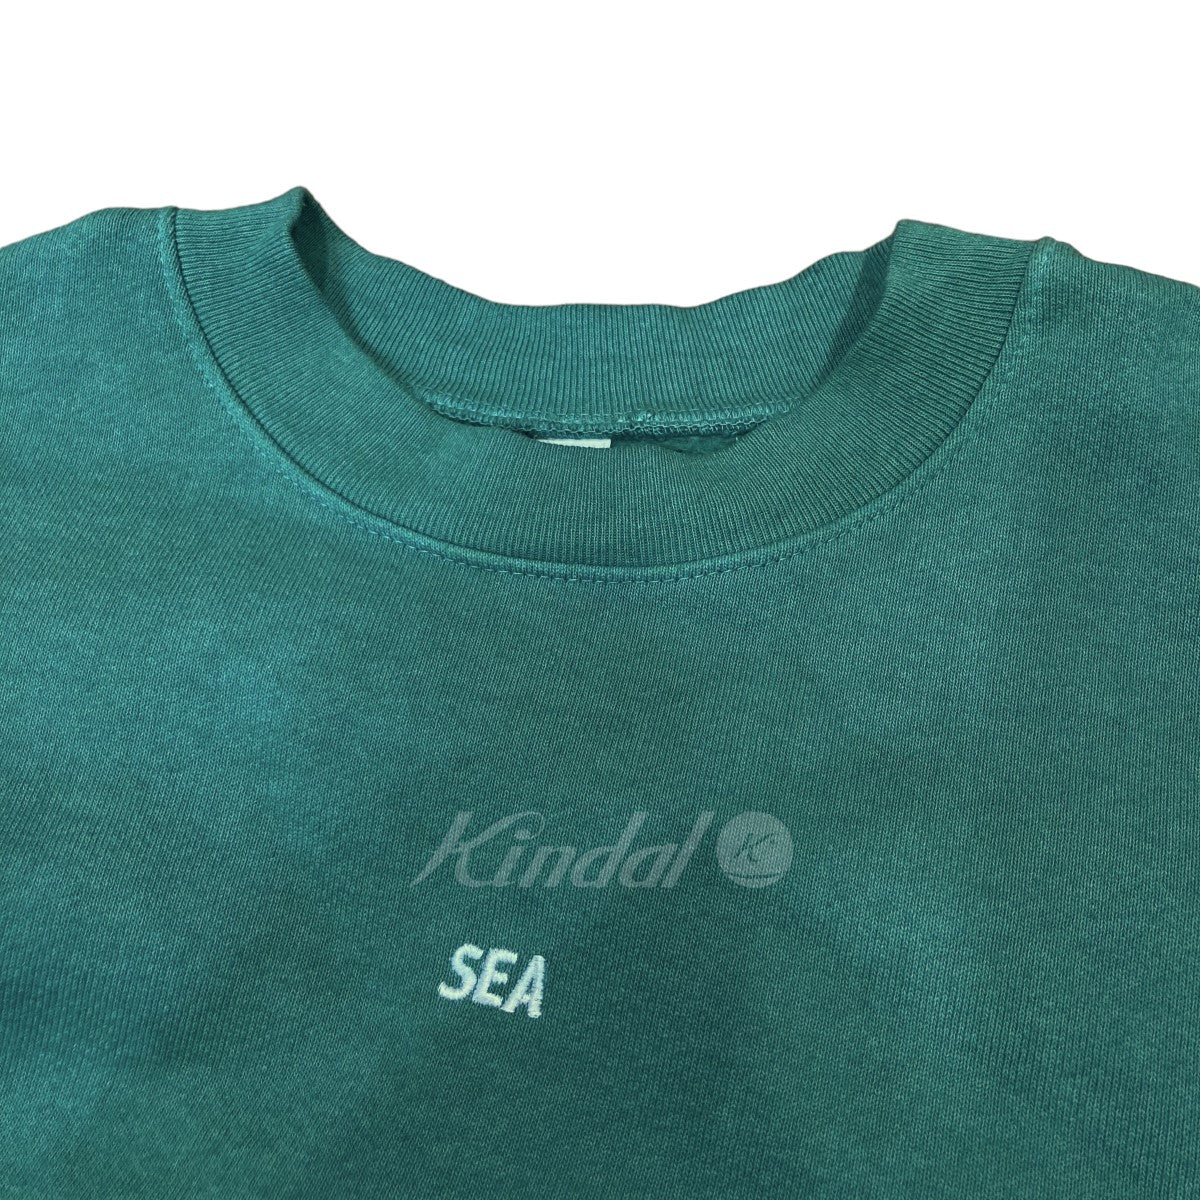 WIND AND SEA×LOS ANGELES APPAREL 22SS ロゴ刺繍スウェット グリーン ...